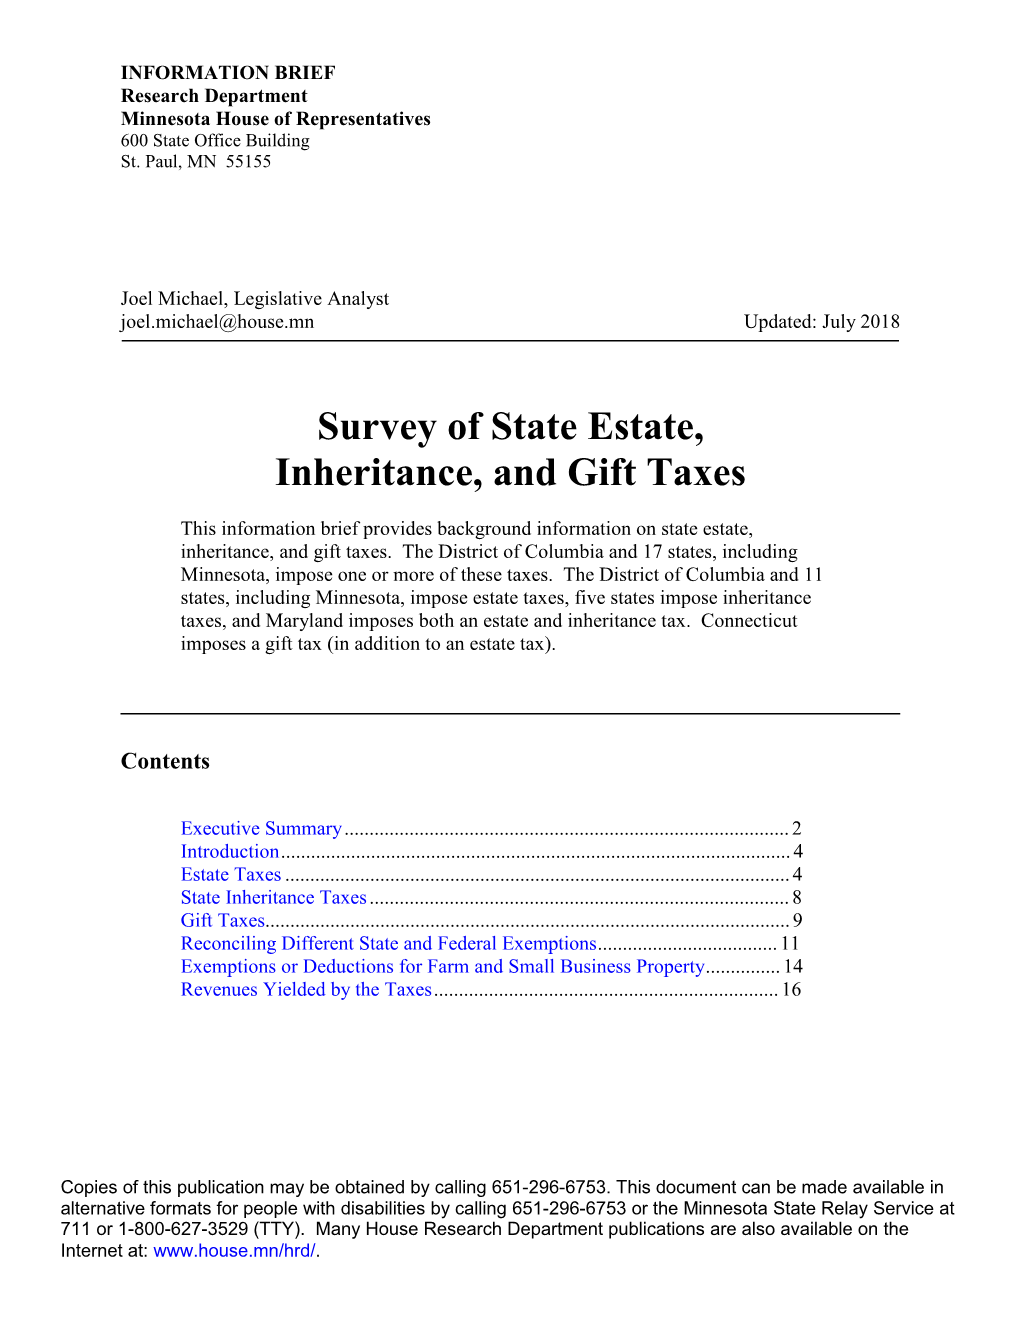 Survey of State Estate, Inheritance, and Gift Taxes